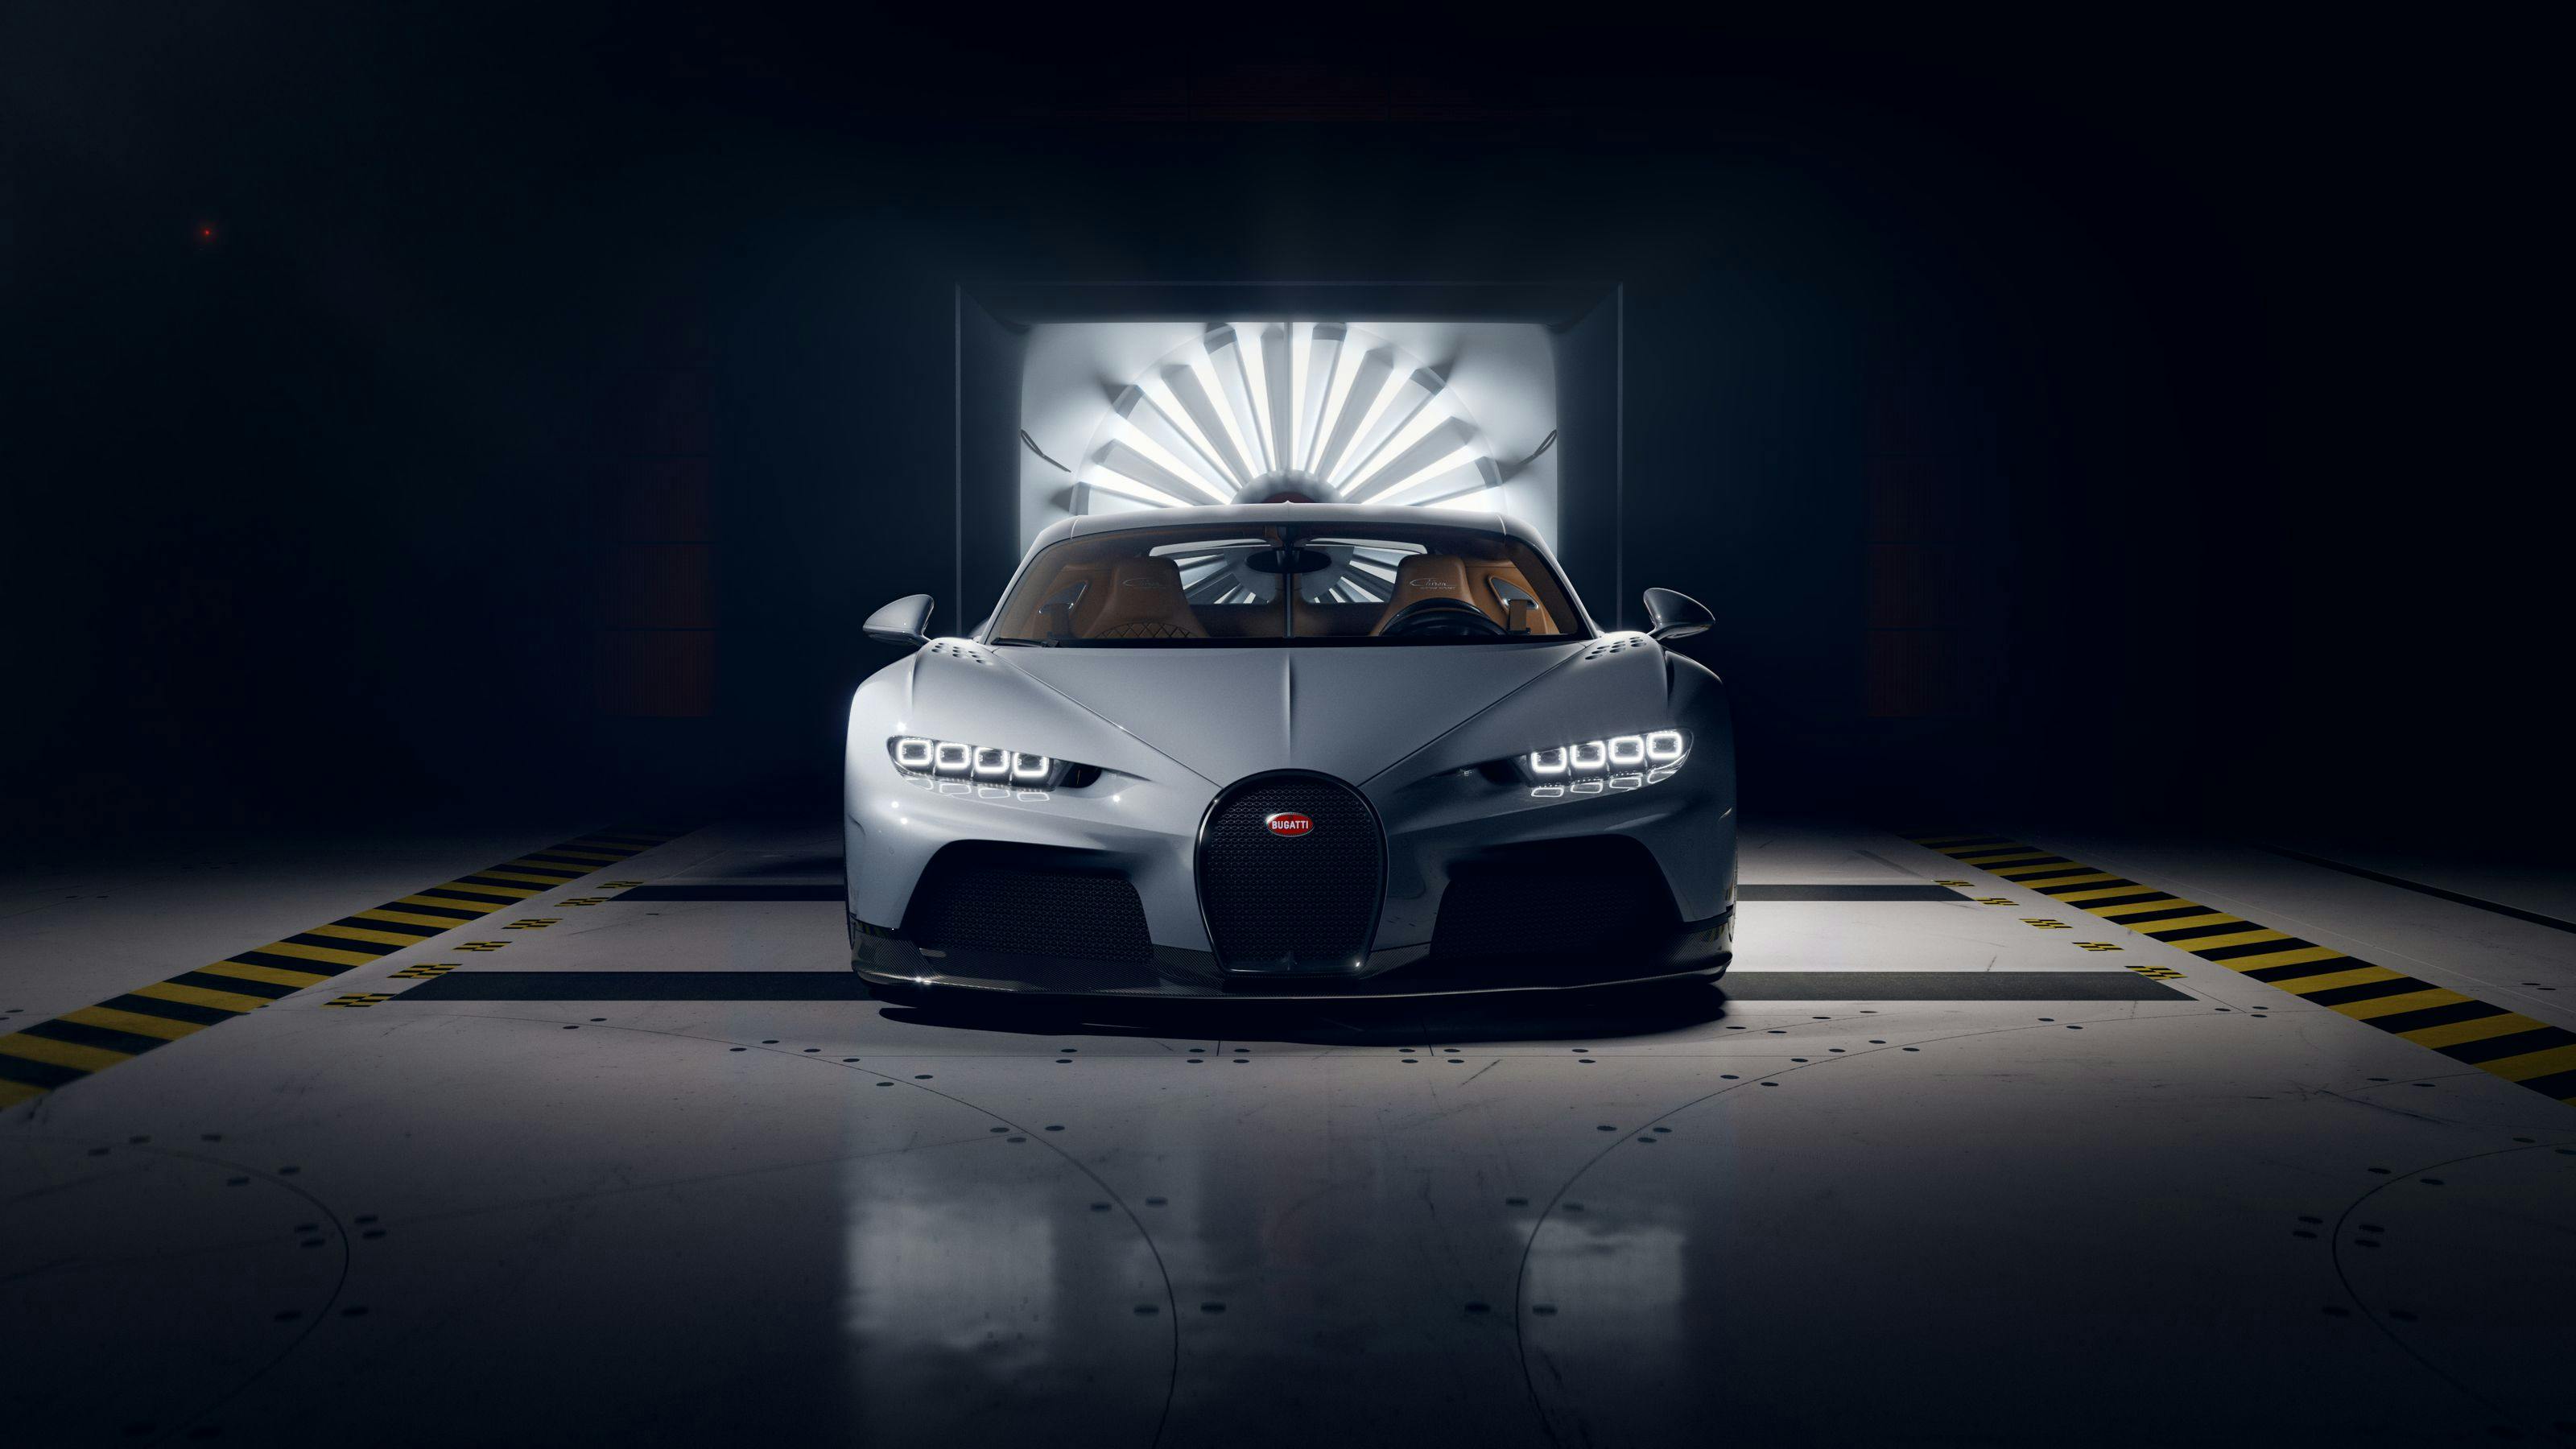 The Bugatti Chiron Super Sport – The Quintessence of Luxury and Speed